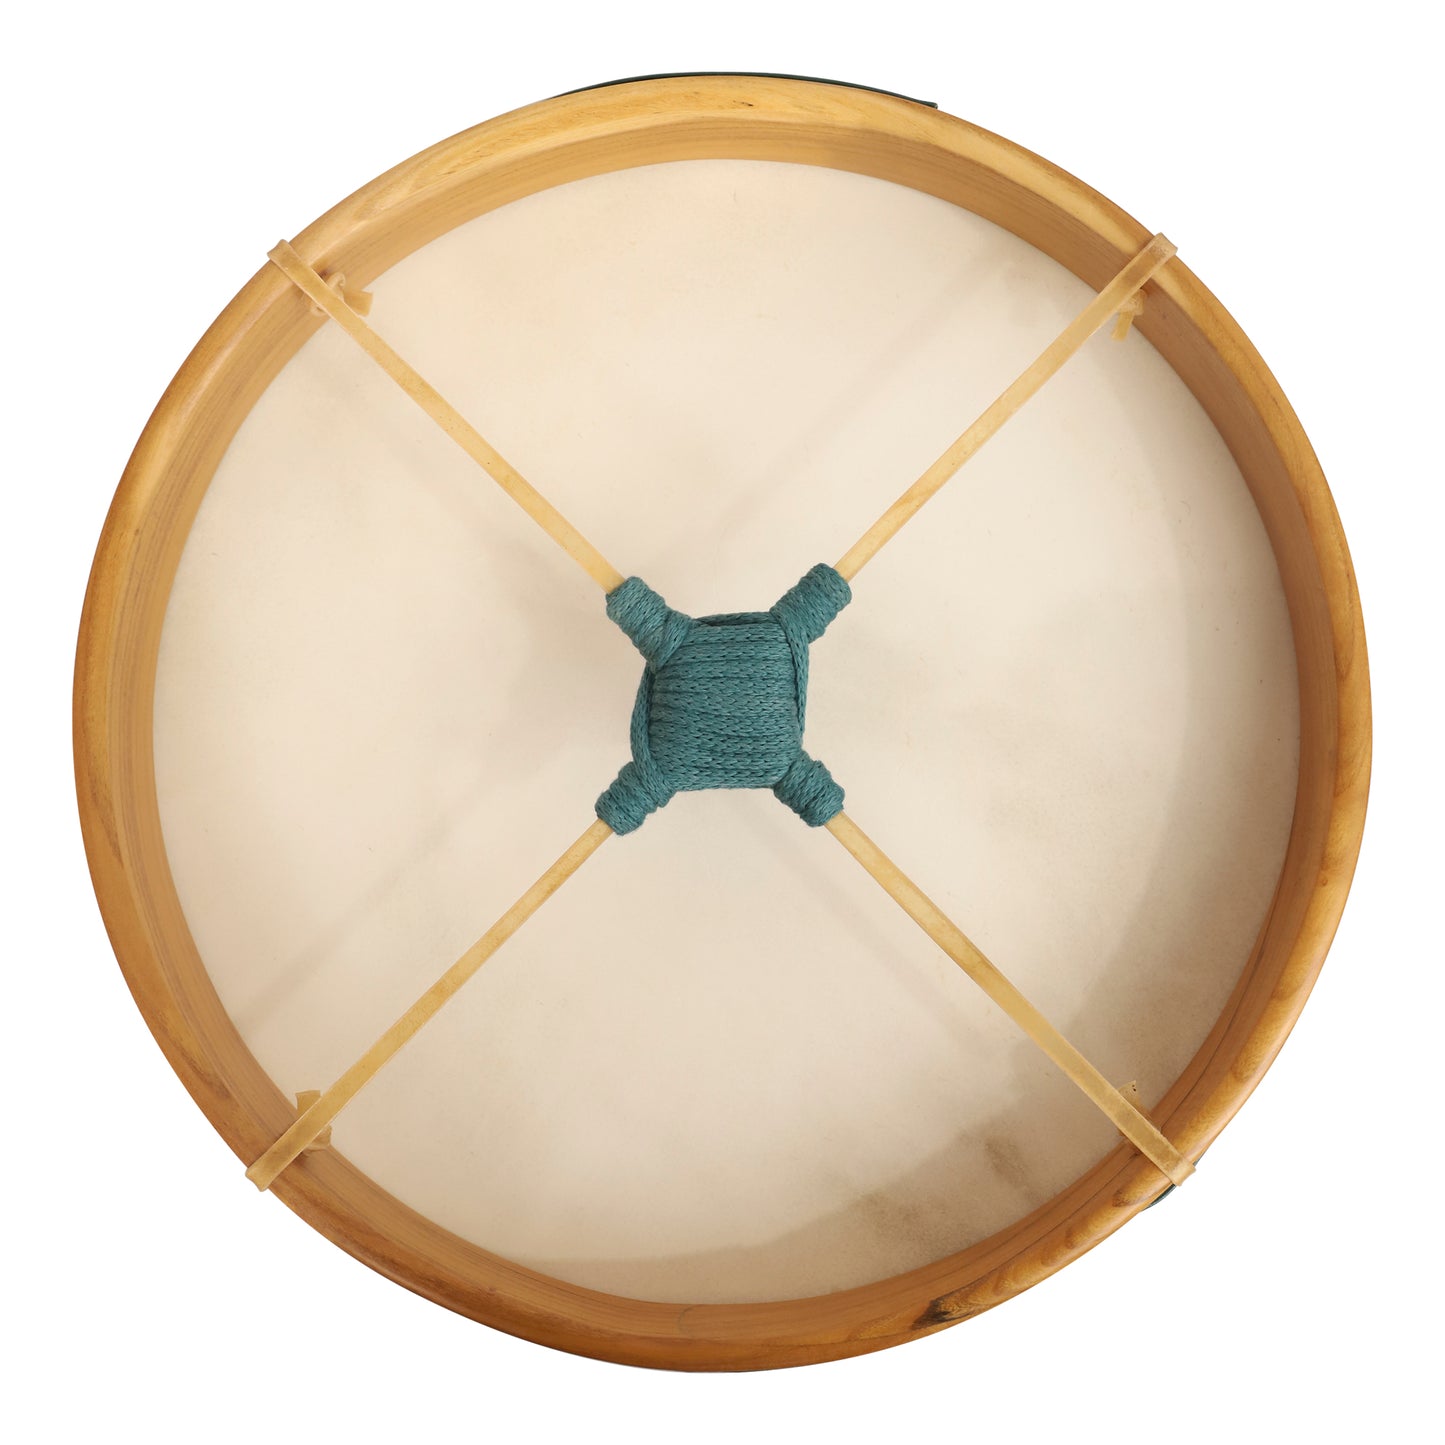 FRAME DRUM 16 INCH NON TUNABLE MULBERRY | SHAMAN DRUM